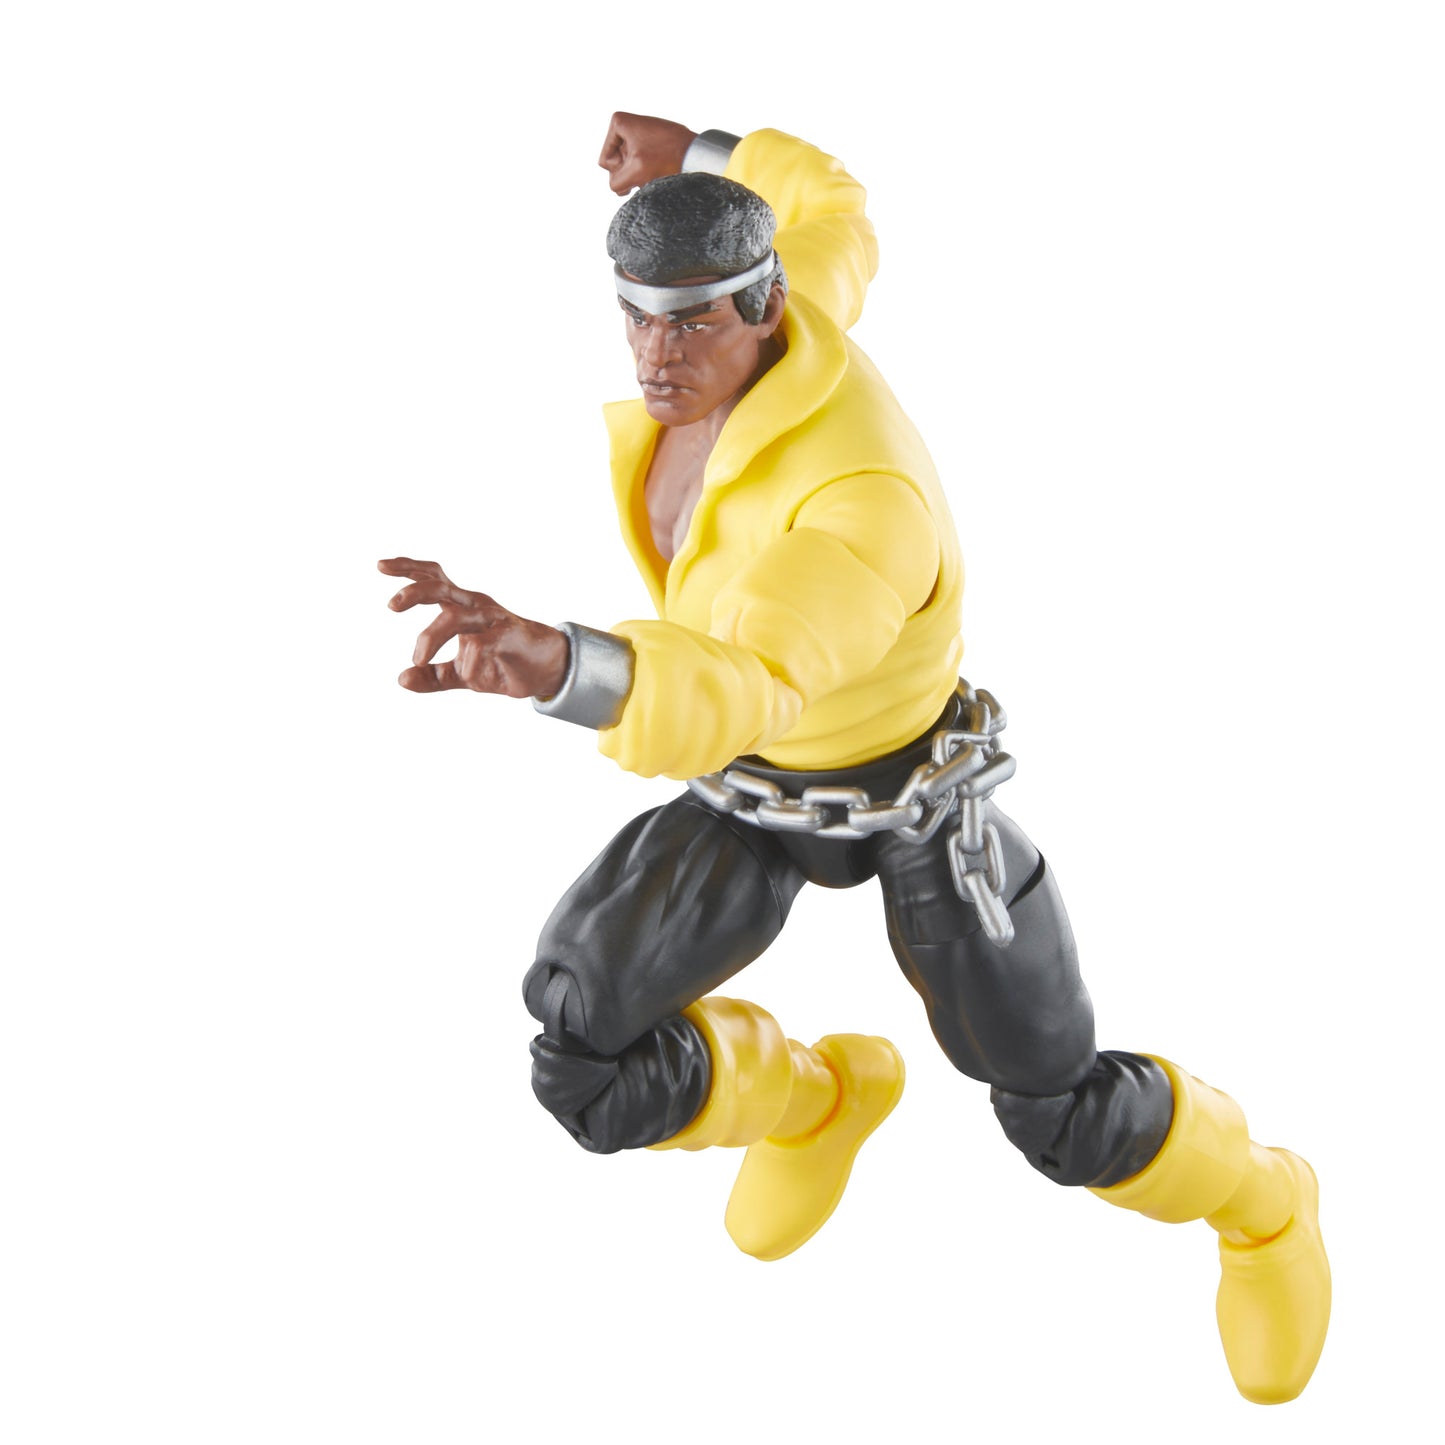 Marvel Legends Series Luke Cage Power Man FIGURE IN A POSE - HERETOSERVEYOU